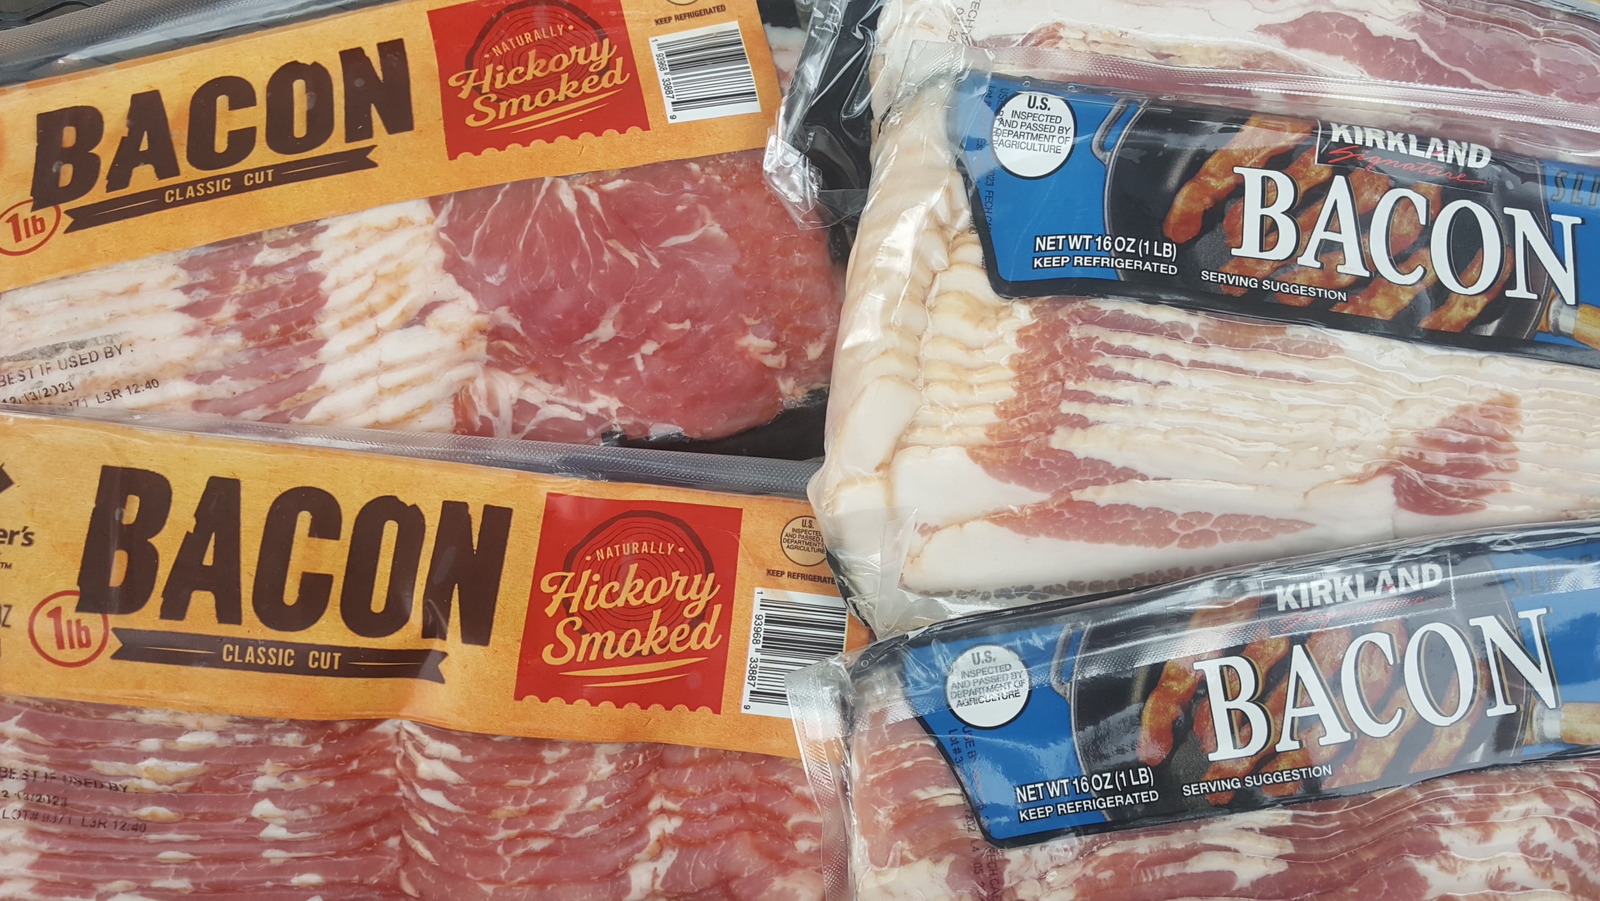 https://www.mashed.com/img/gallery/members-mark-bacon-vs-kirkland-bacon-which-one-should-you-buy/l-intro-1698033851.jpg